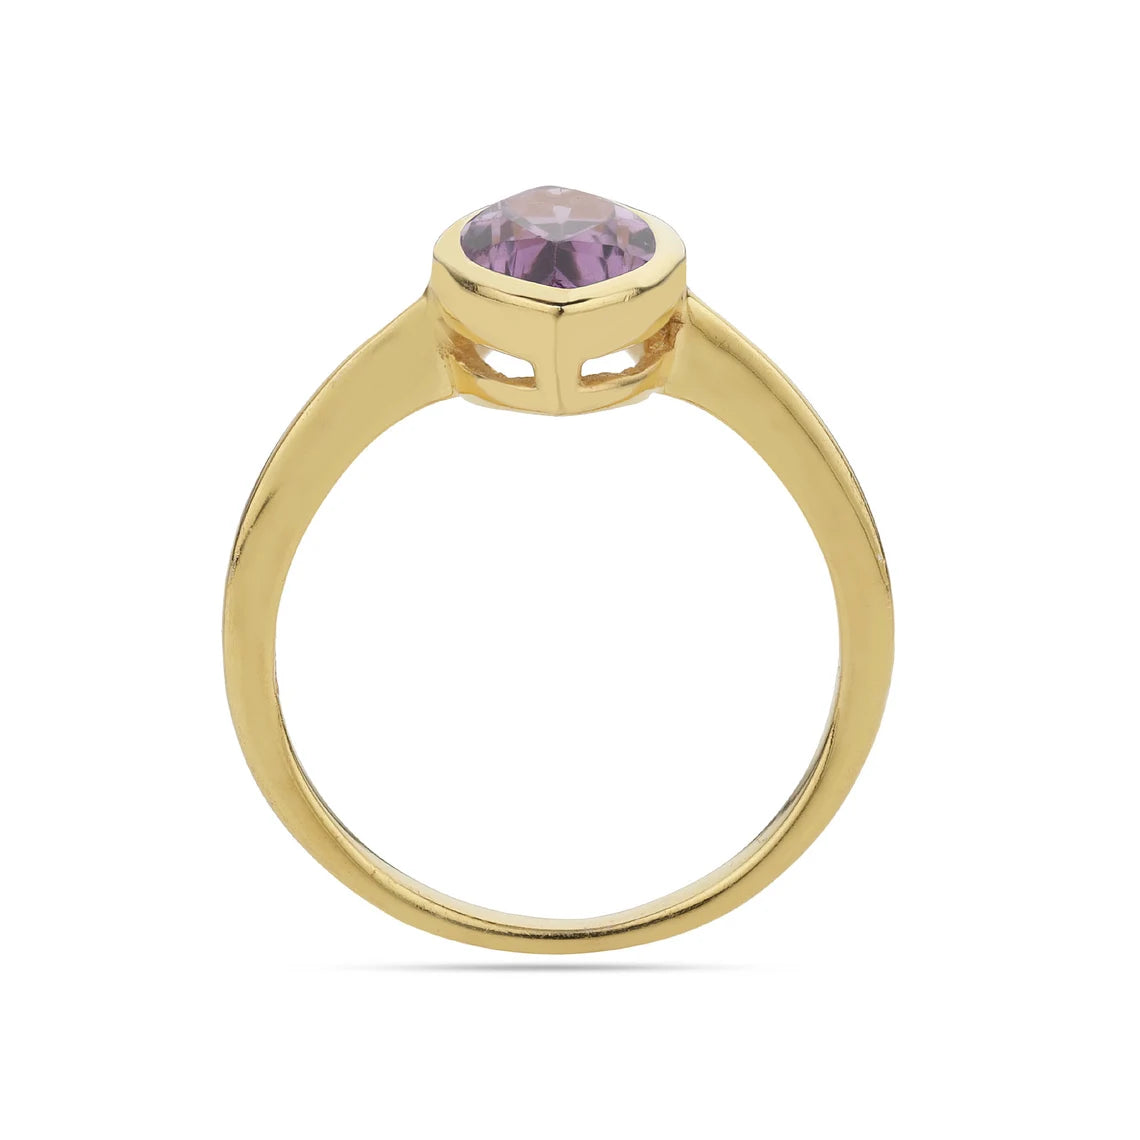 Marquise Amethyst Ring-Gold-Rich Purple, Estate-Set-Solitaire Style-Large Stone-February Birthstone-